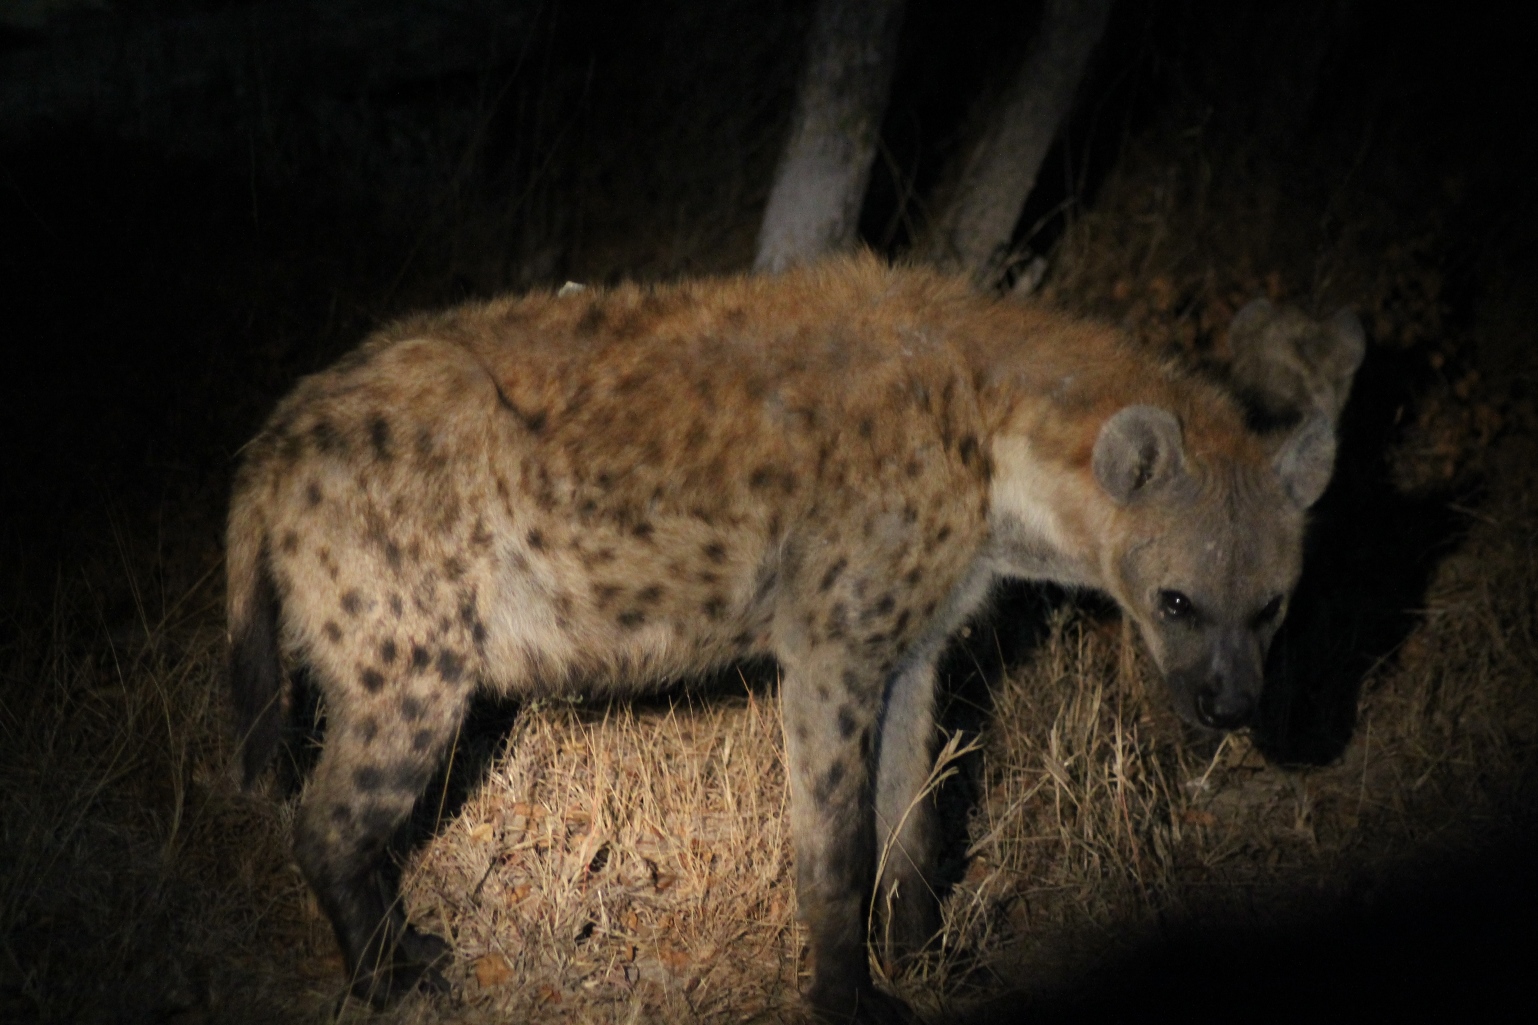  An adult hyena in the darkness.&nbsp;© Emma Dunston 